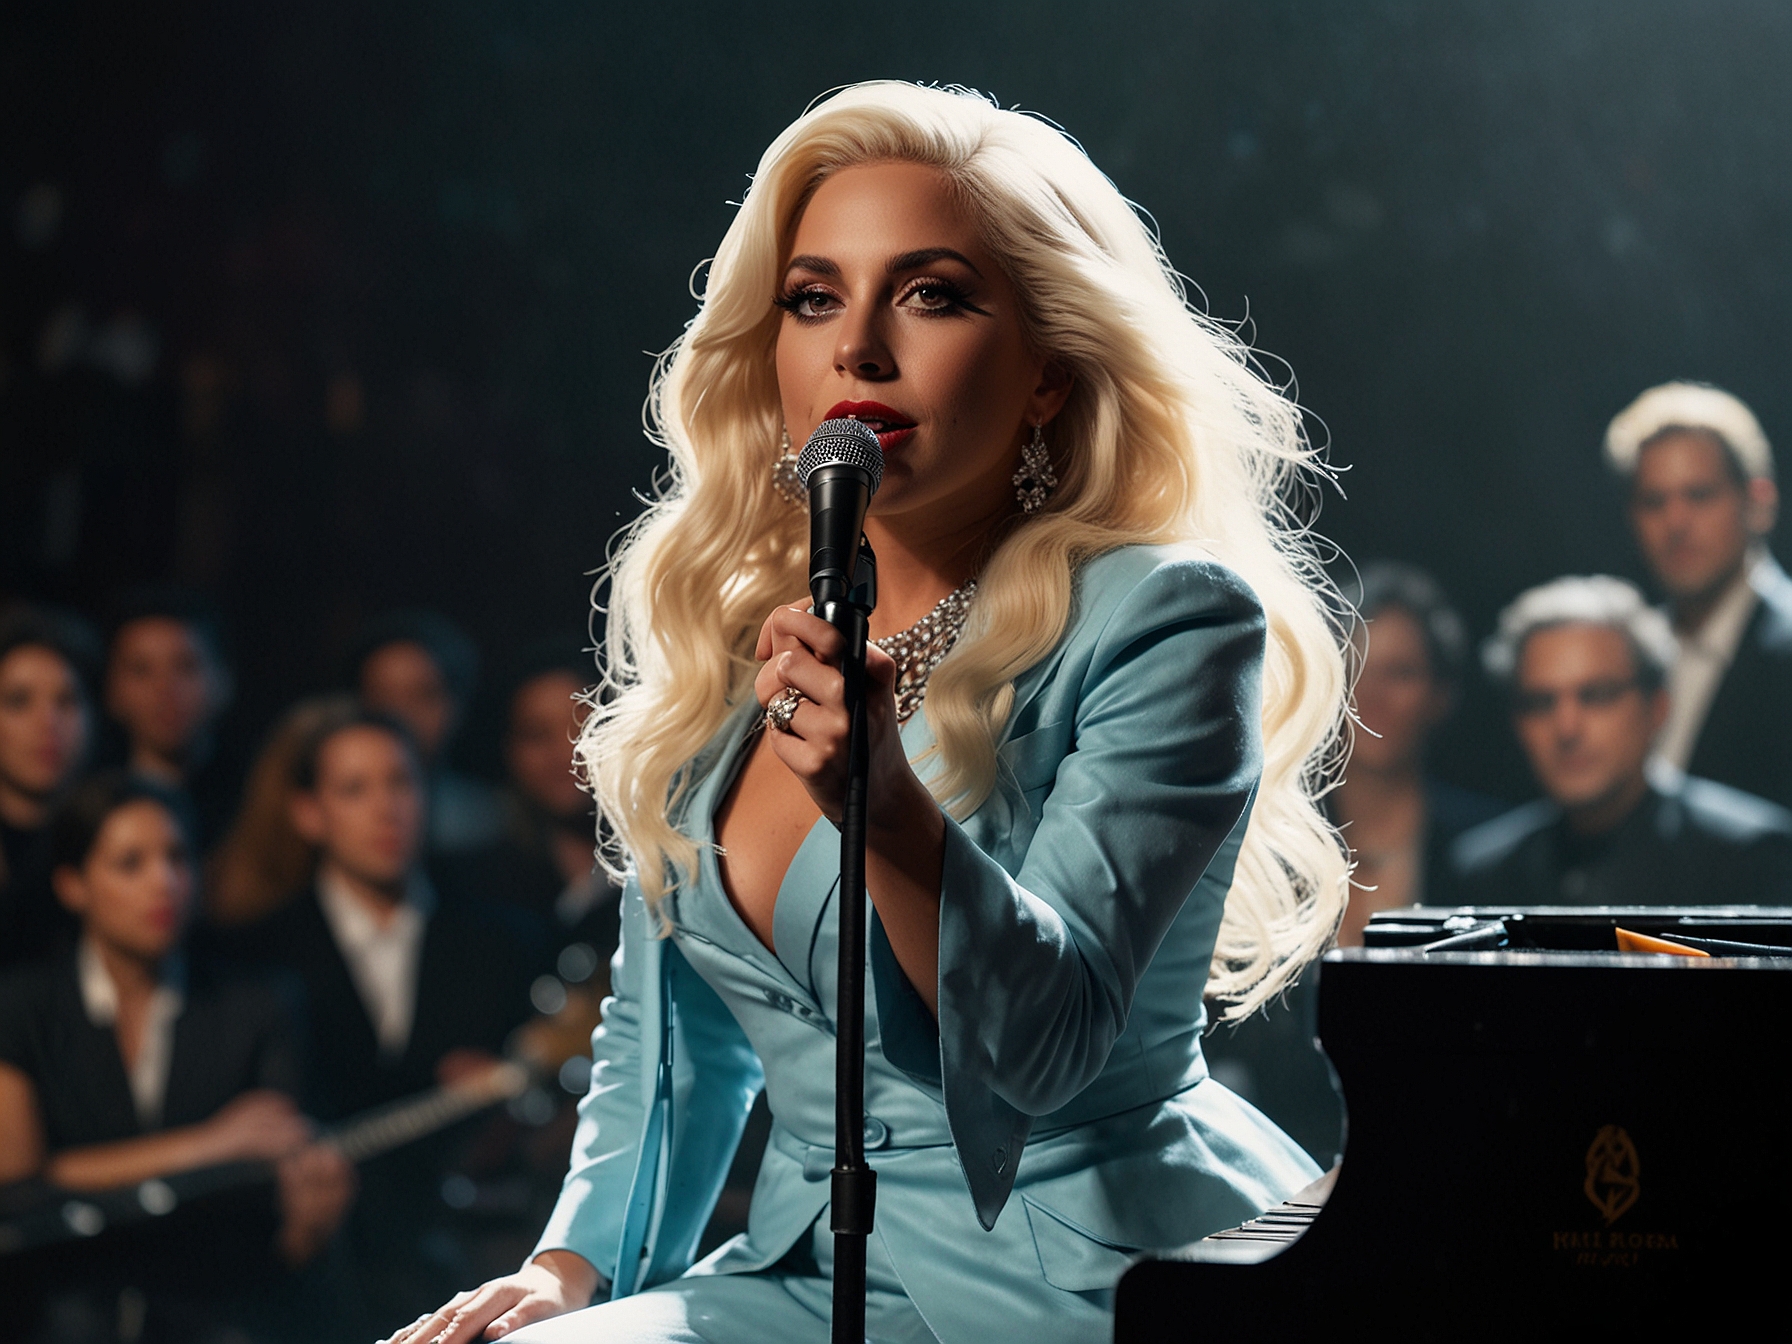 Lady Gaga captivates the audience at Park MGM’s Park Theater, her powerful voice blending effortlessly with a soulful jazz band, evoking the magic of traditional jazz clubs.